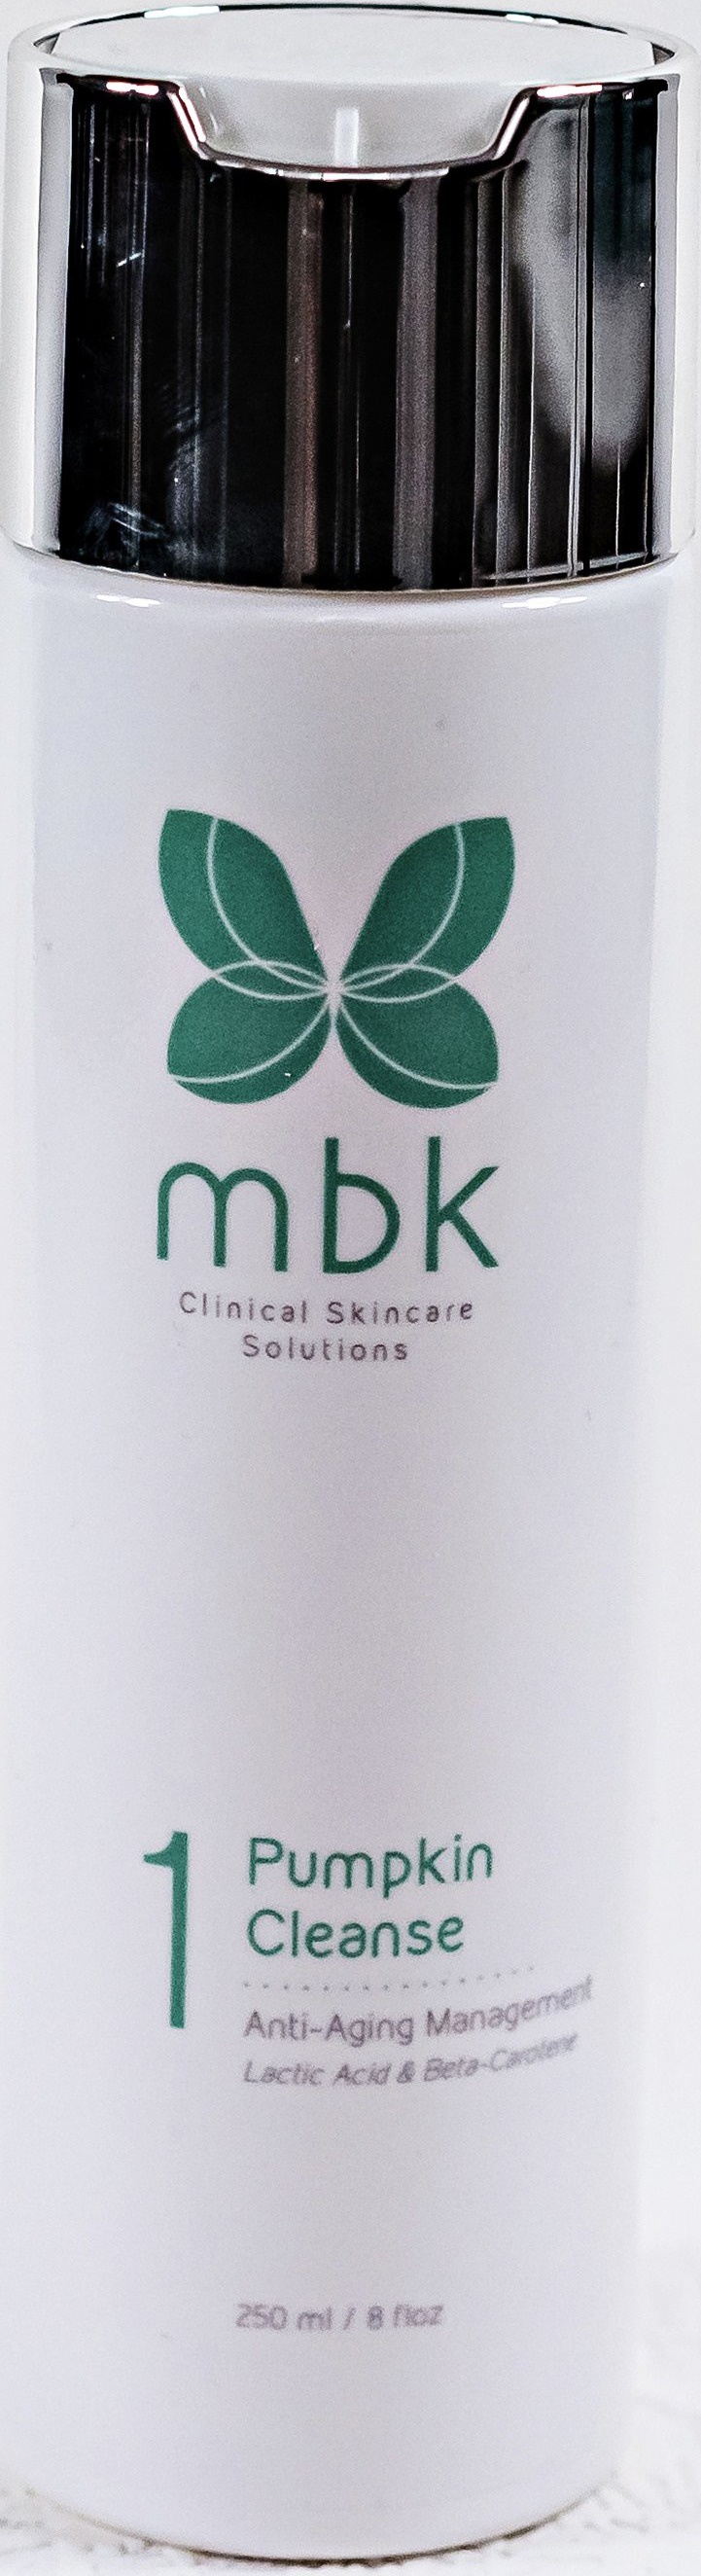 MBK Clinical Skincare Solutions Pumpkin Cleanse